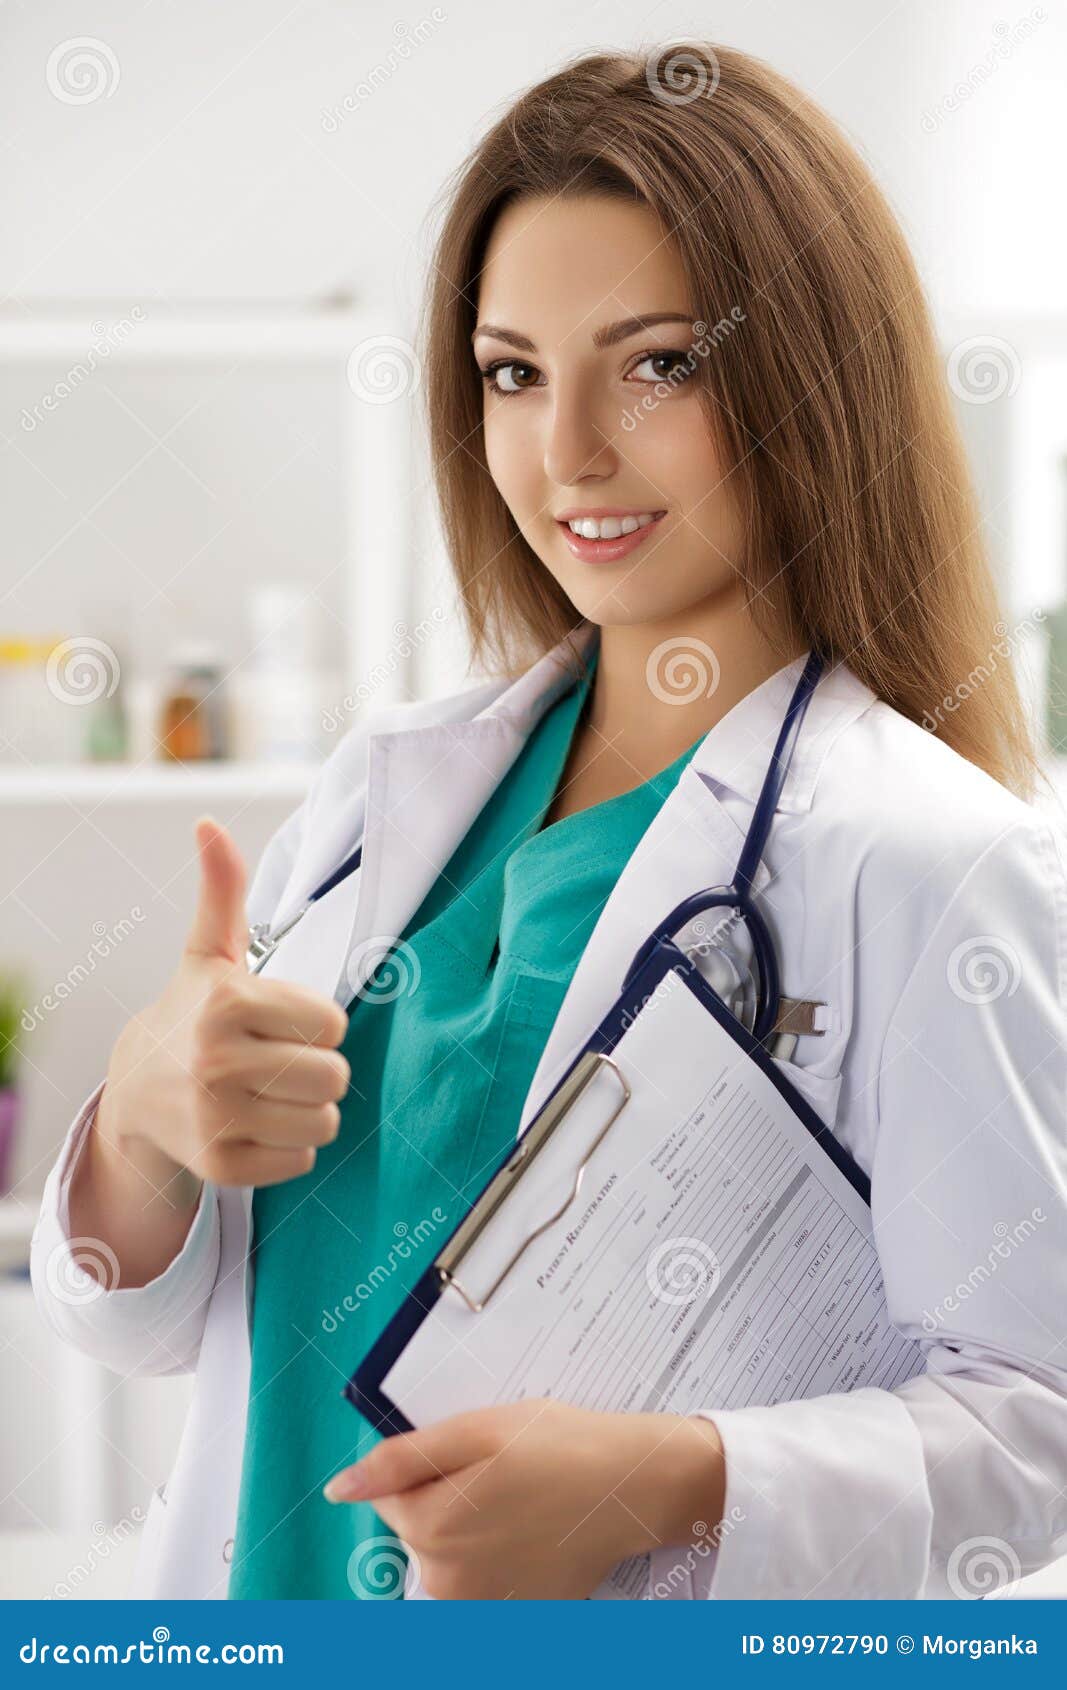 smiling female doctor showing thumb up